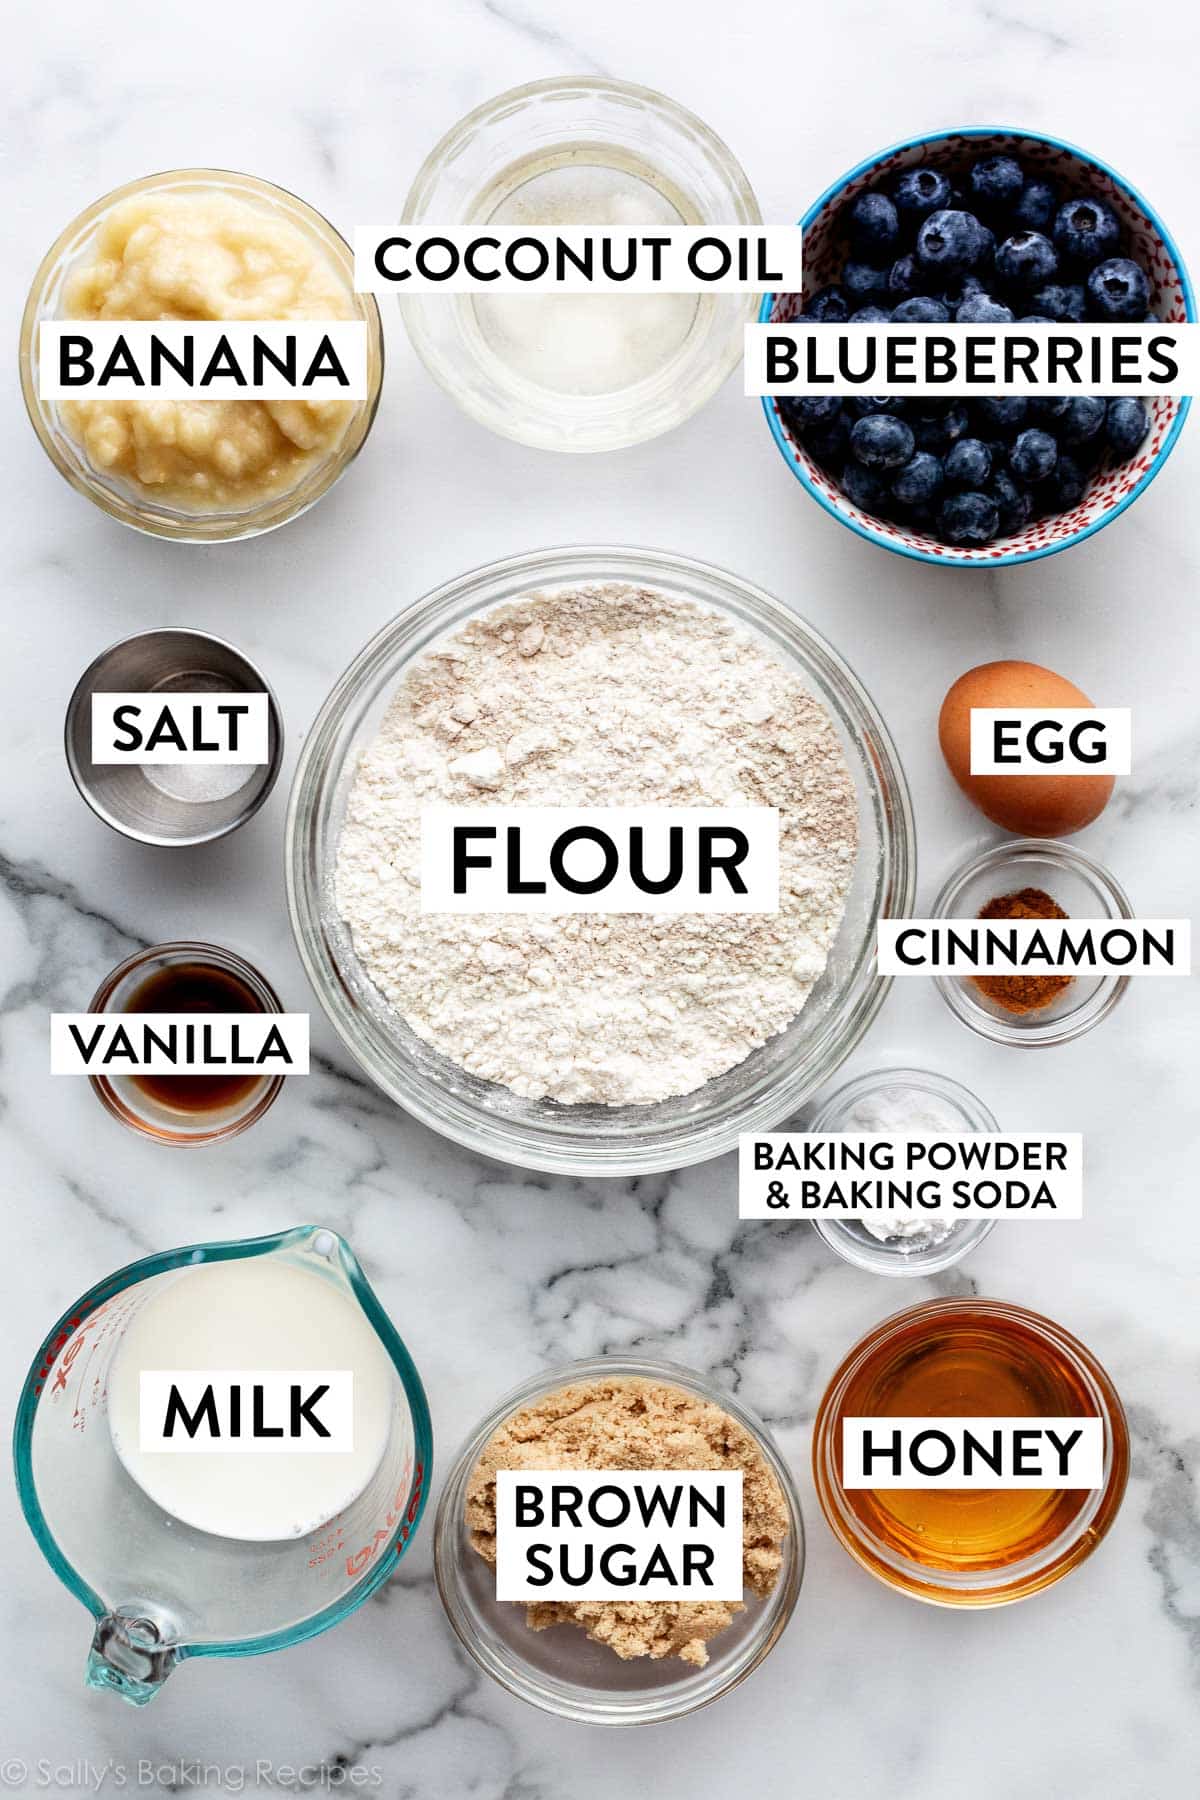 ingredients on counter including flour, blueberries, mashed banana, honey, milk, and coconut oil.